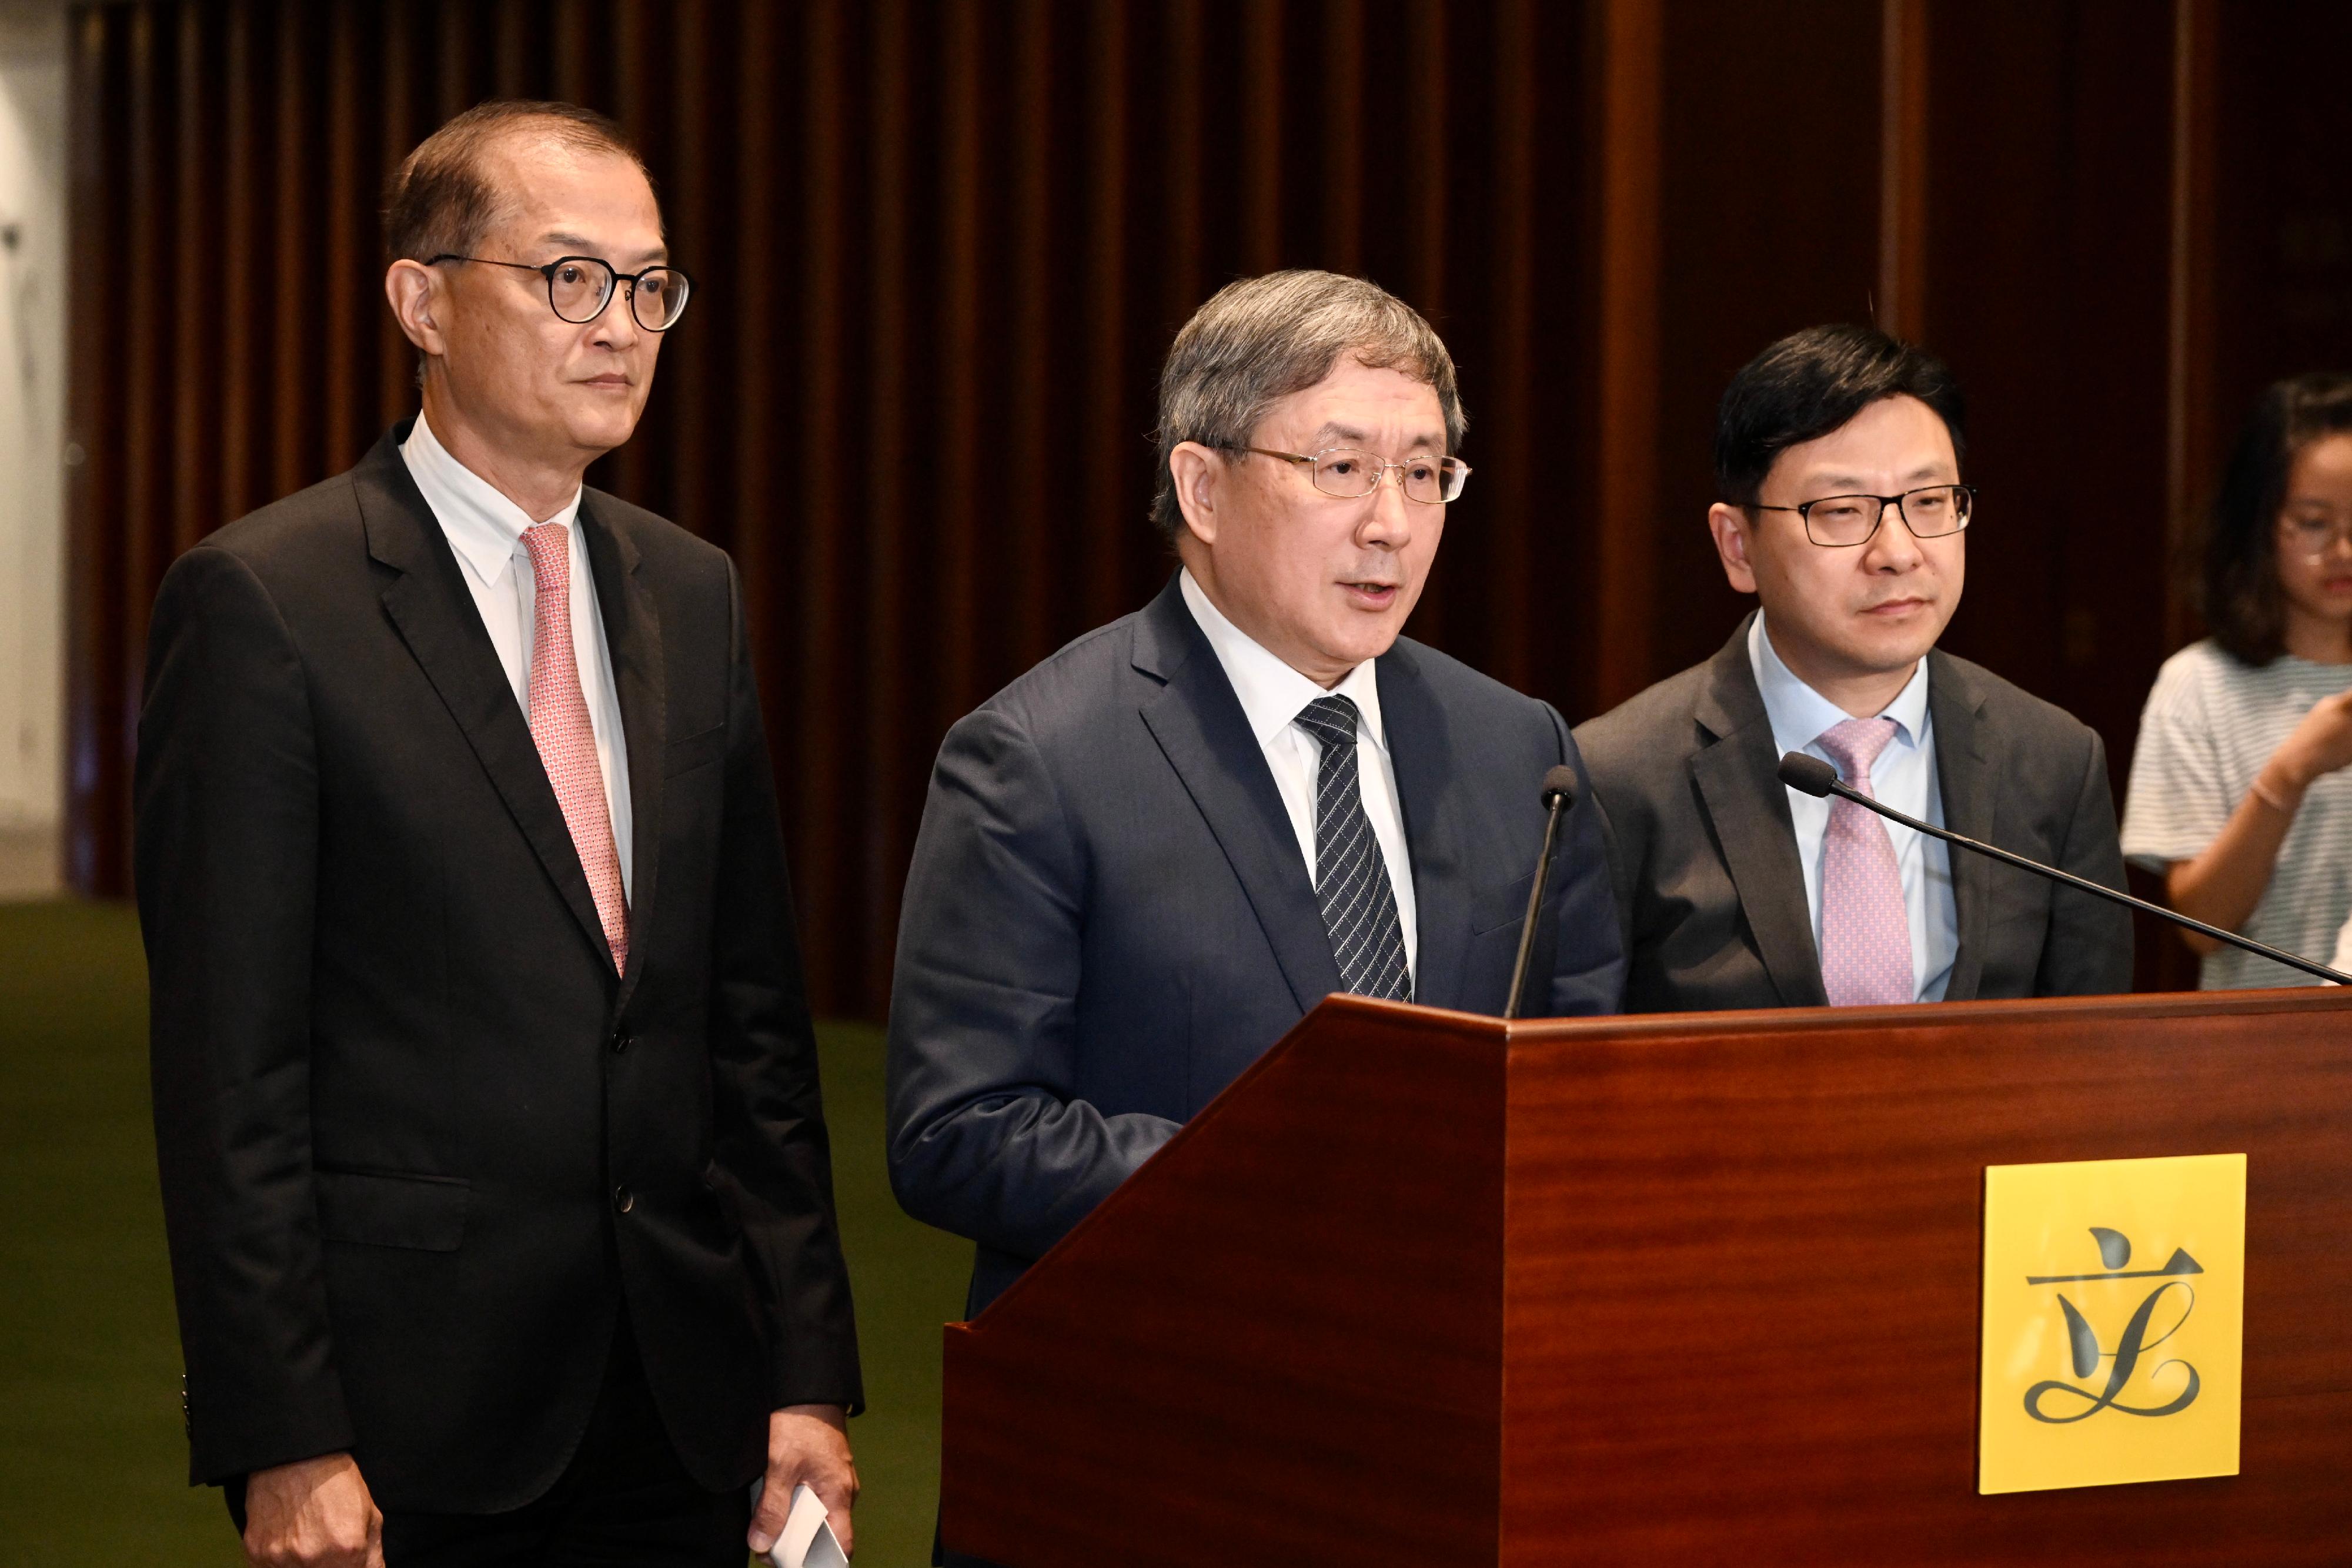 The Deputy Chief Secretary for Administration, Mr Cheuk Wing-hing (centre); the Secretary for Health, Professor Lo Chung-mau (left); and the Secretary for Labour and Welfare, Mr Chris Sun (right), meet the media after attending the Ante Chamber exchange session at the Legislative Council today (June 28).